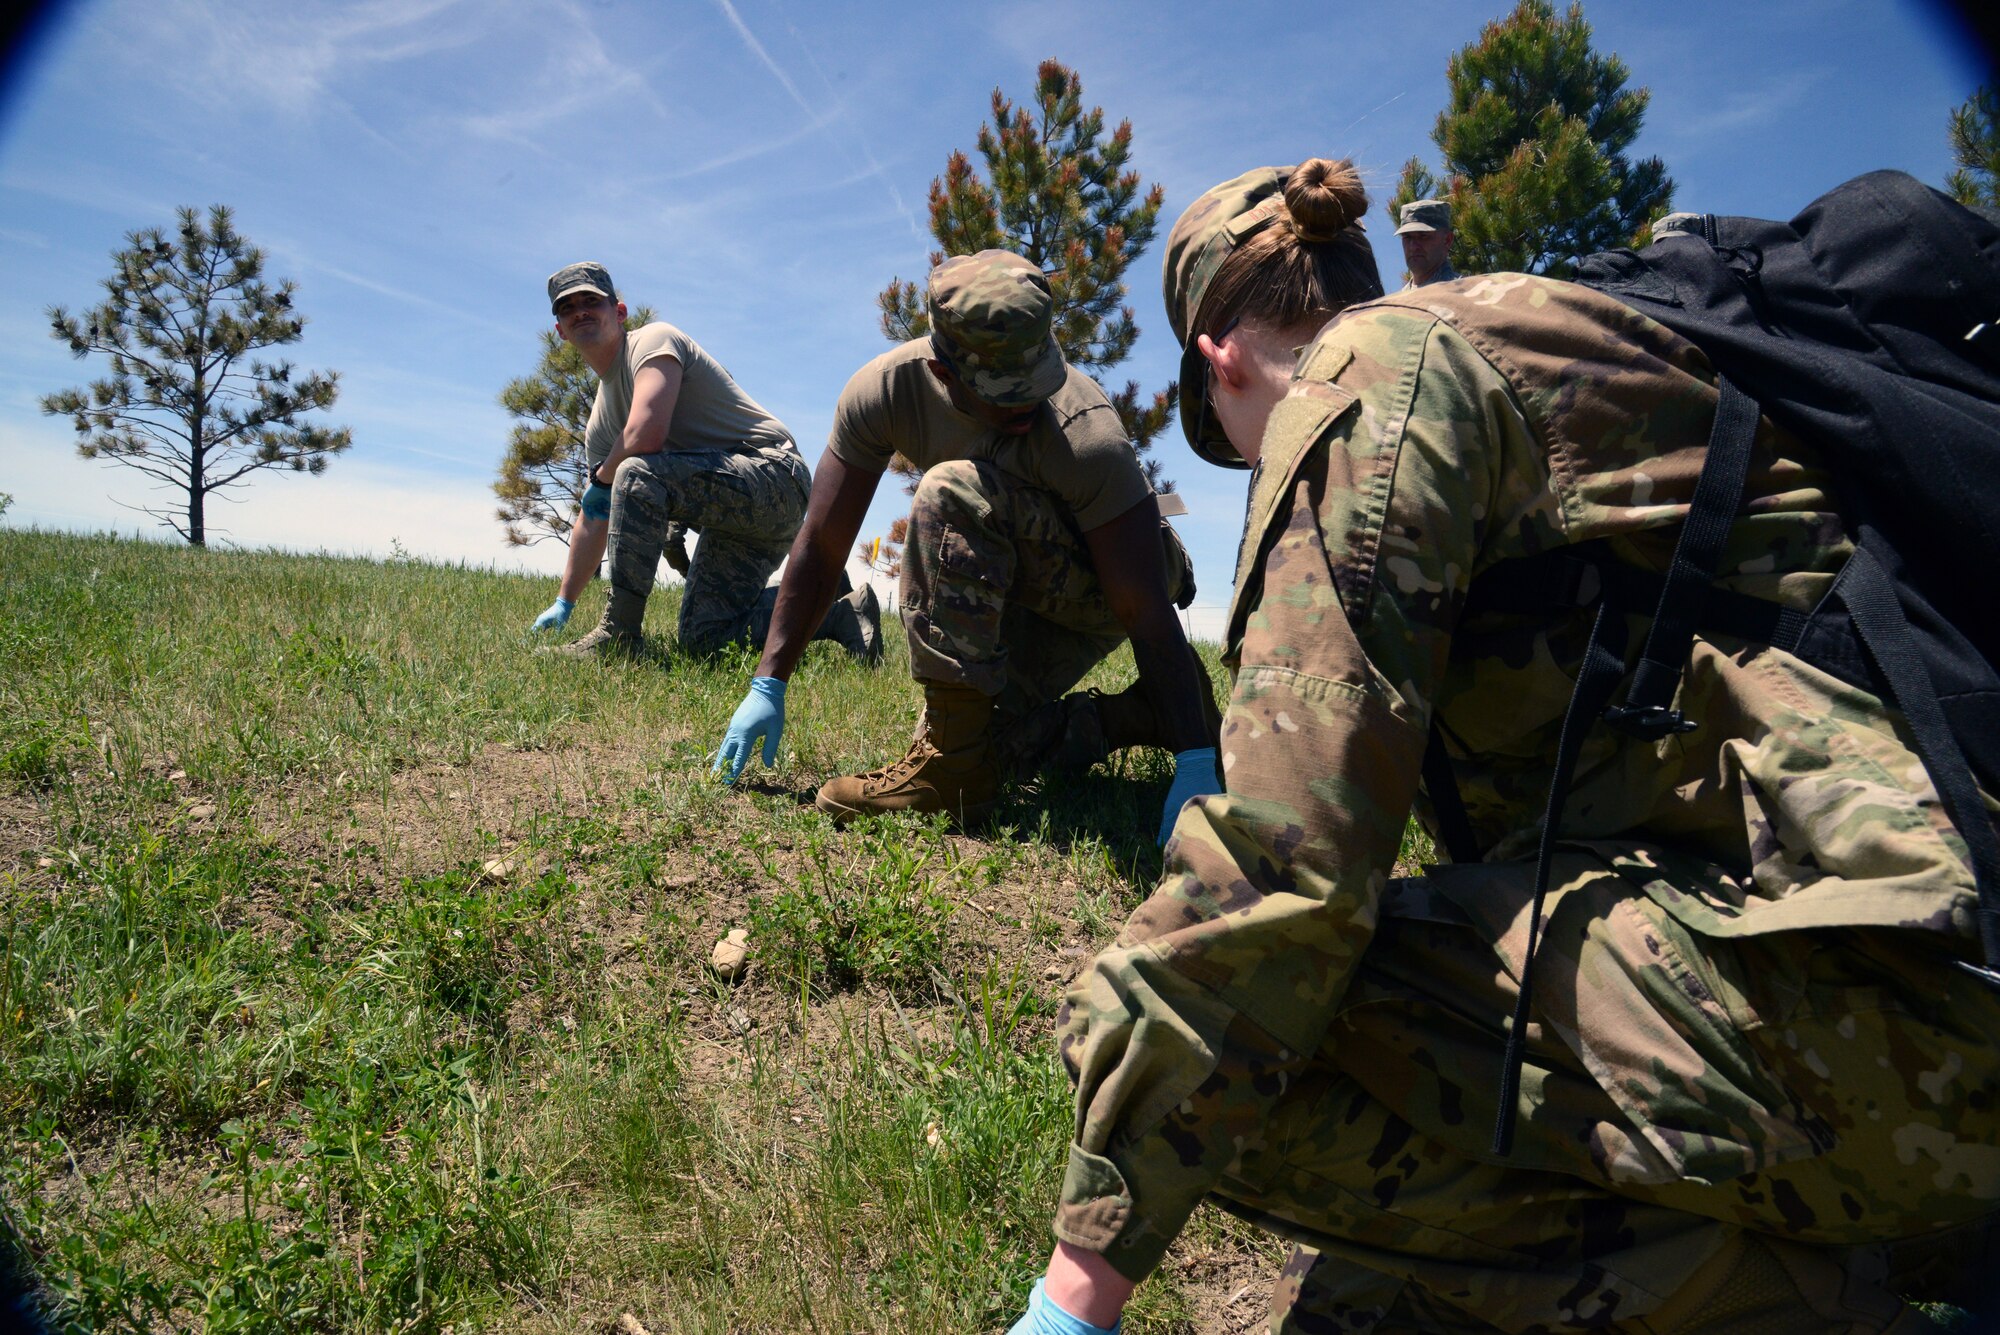 Airman 1st Class Amanda Deringer (right), Senior Airman Brian Williams (center), and other Airmen from the 341st Force Support Squadron, participate in a search and recovery exercise June 12, 2019, at Malmstrom Air Force Base, Mont. The exercise simulated an aircraft crash site, requiring the Airmen to search the terrain for any for remains of individuals or parts of the fictitious aircraft. (U.S. Air Force photo by Staff Sgt. Magen M. Reeves)